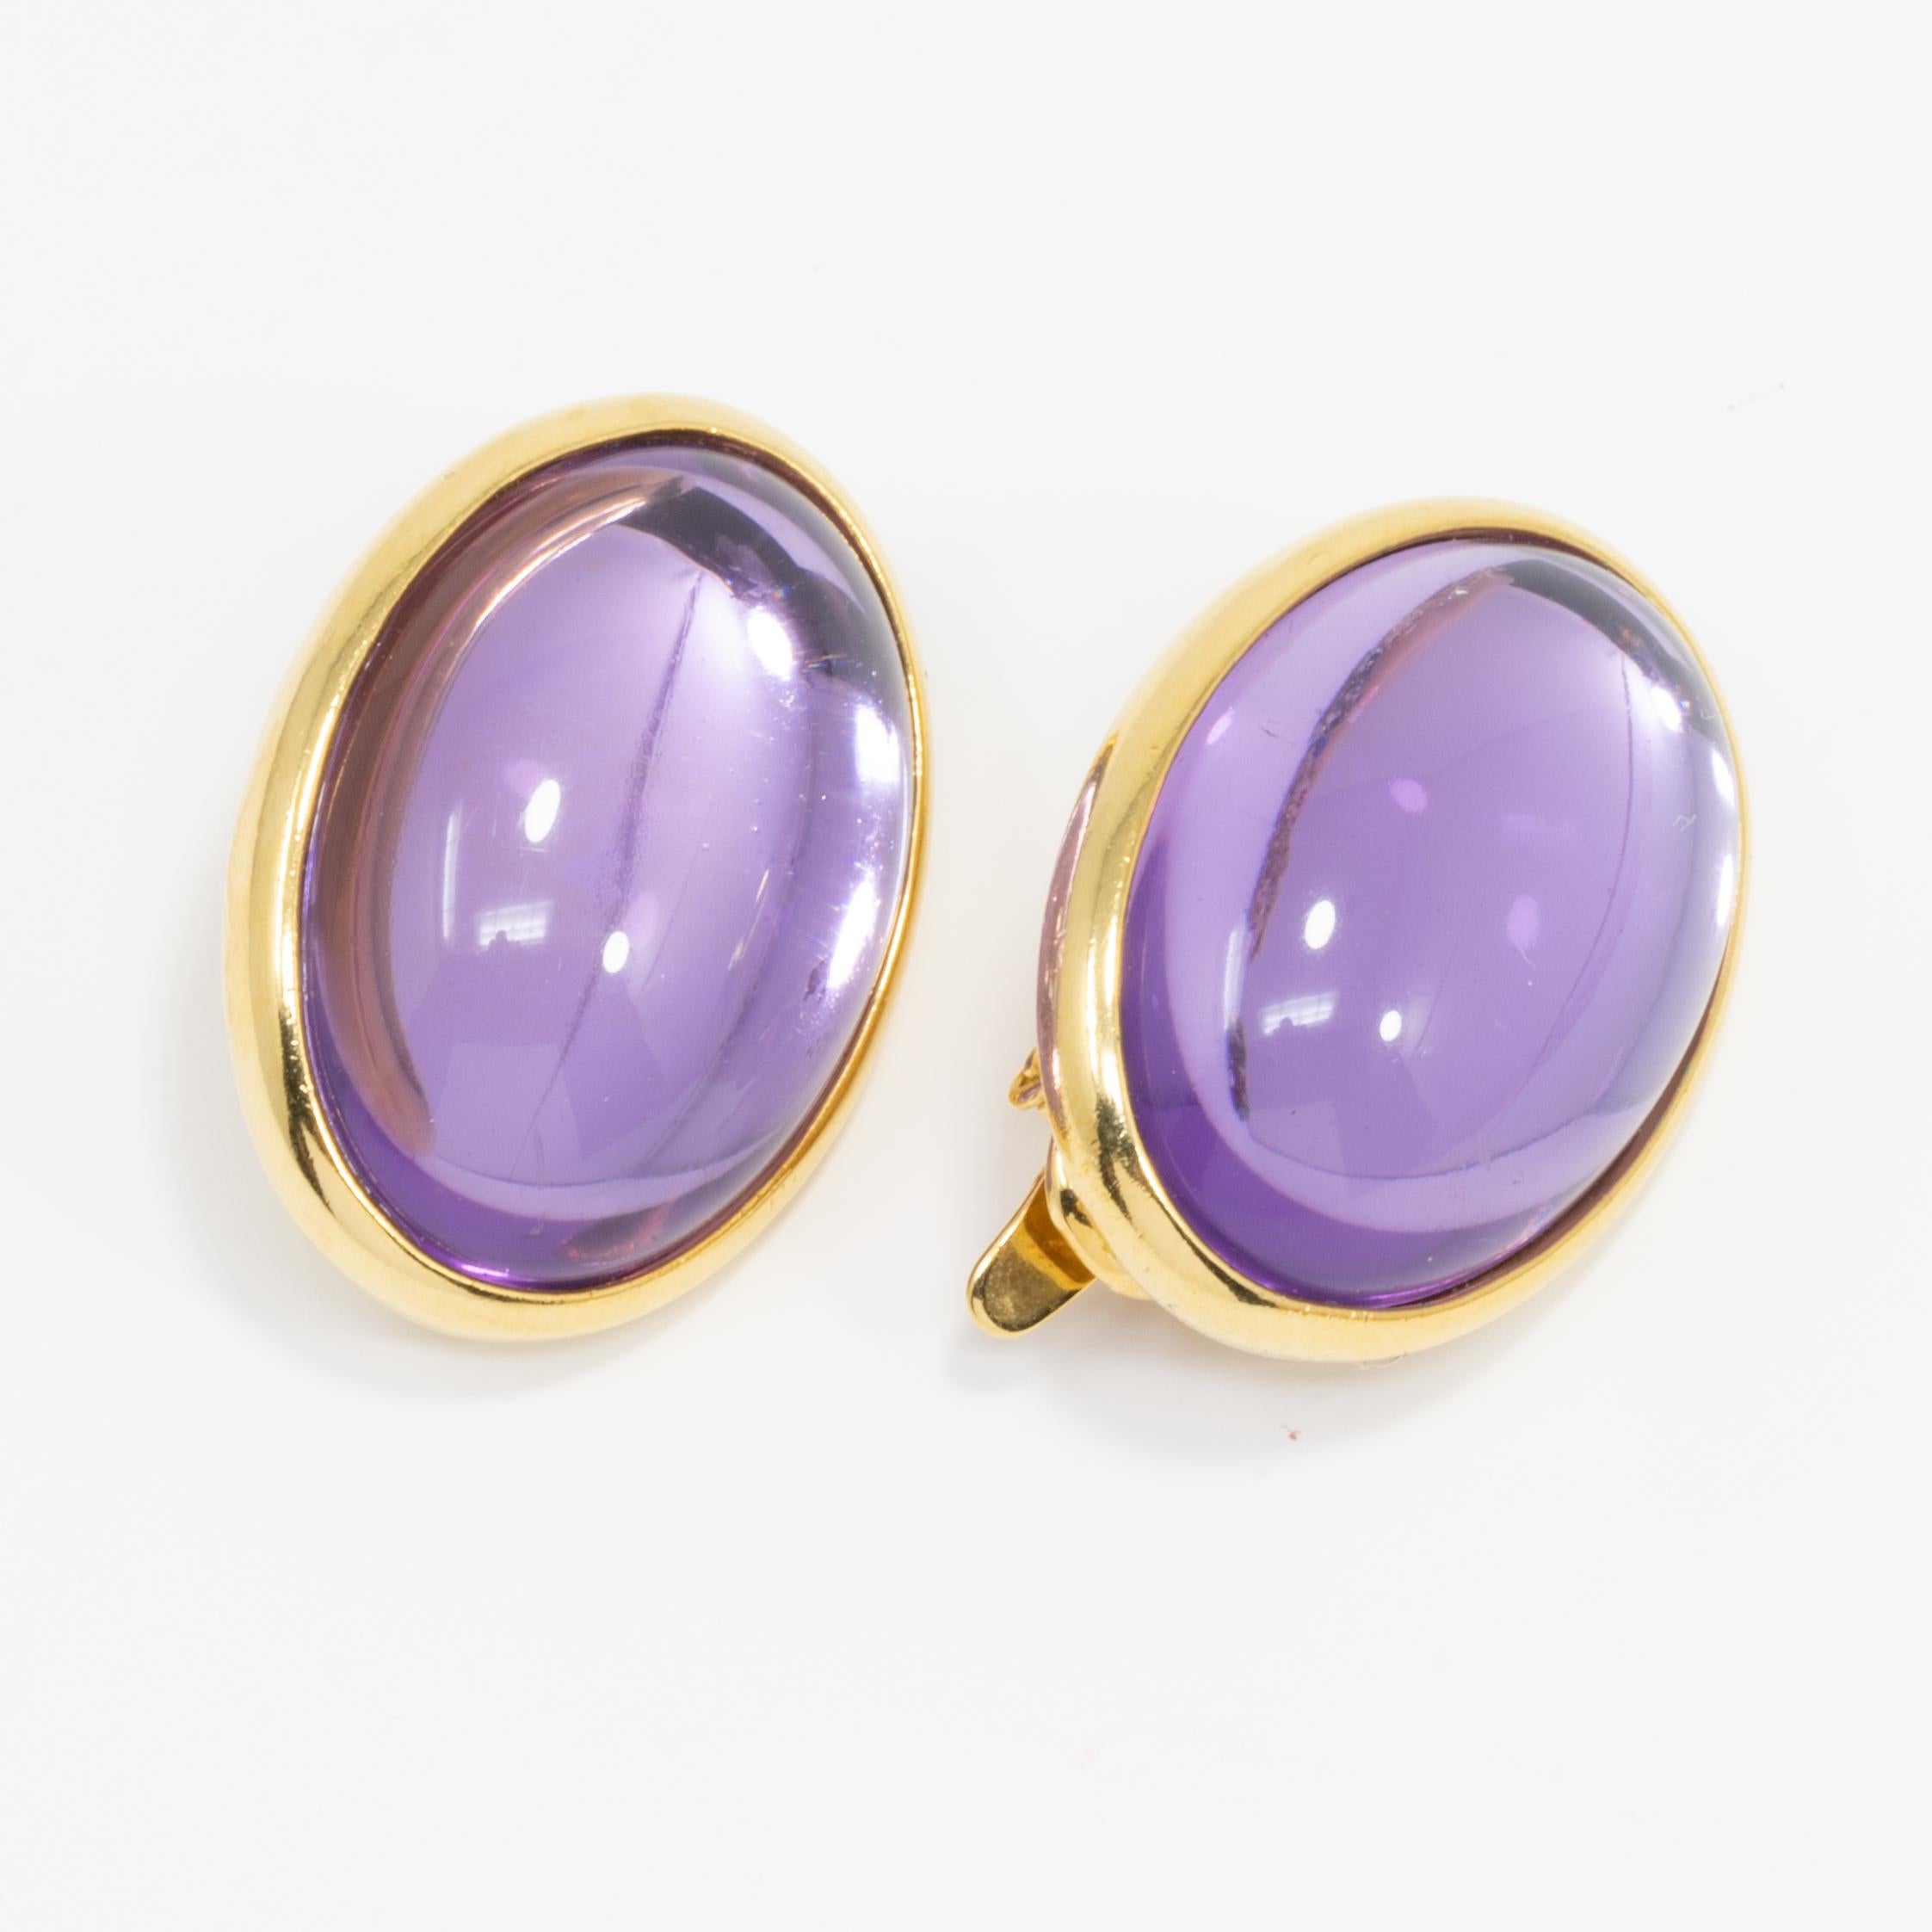 A pair of retro-style Trifari clip-on earrings. Translucent, moon-glow, amethyst cabochons are set in oval, gold-plated clips for a sophisticated, mysterious look.

Hallmarks: Trifari TM